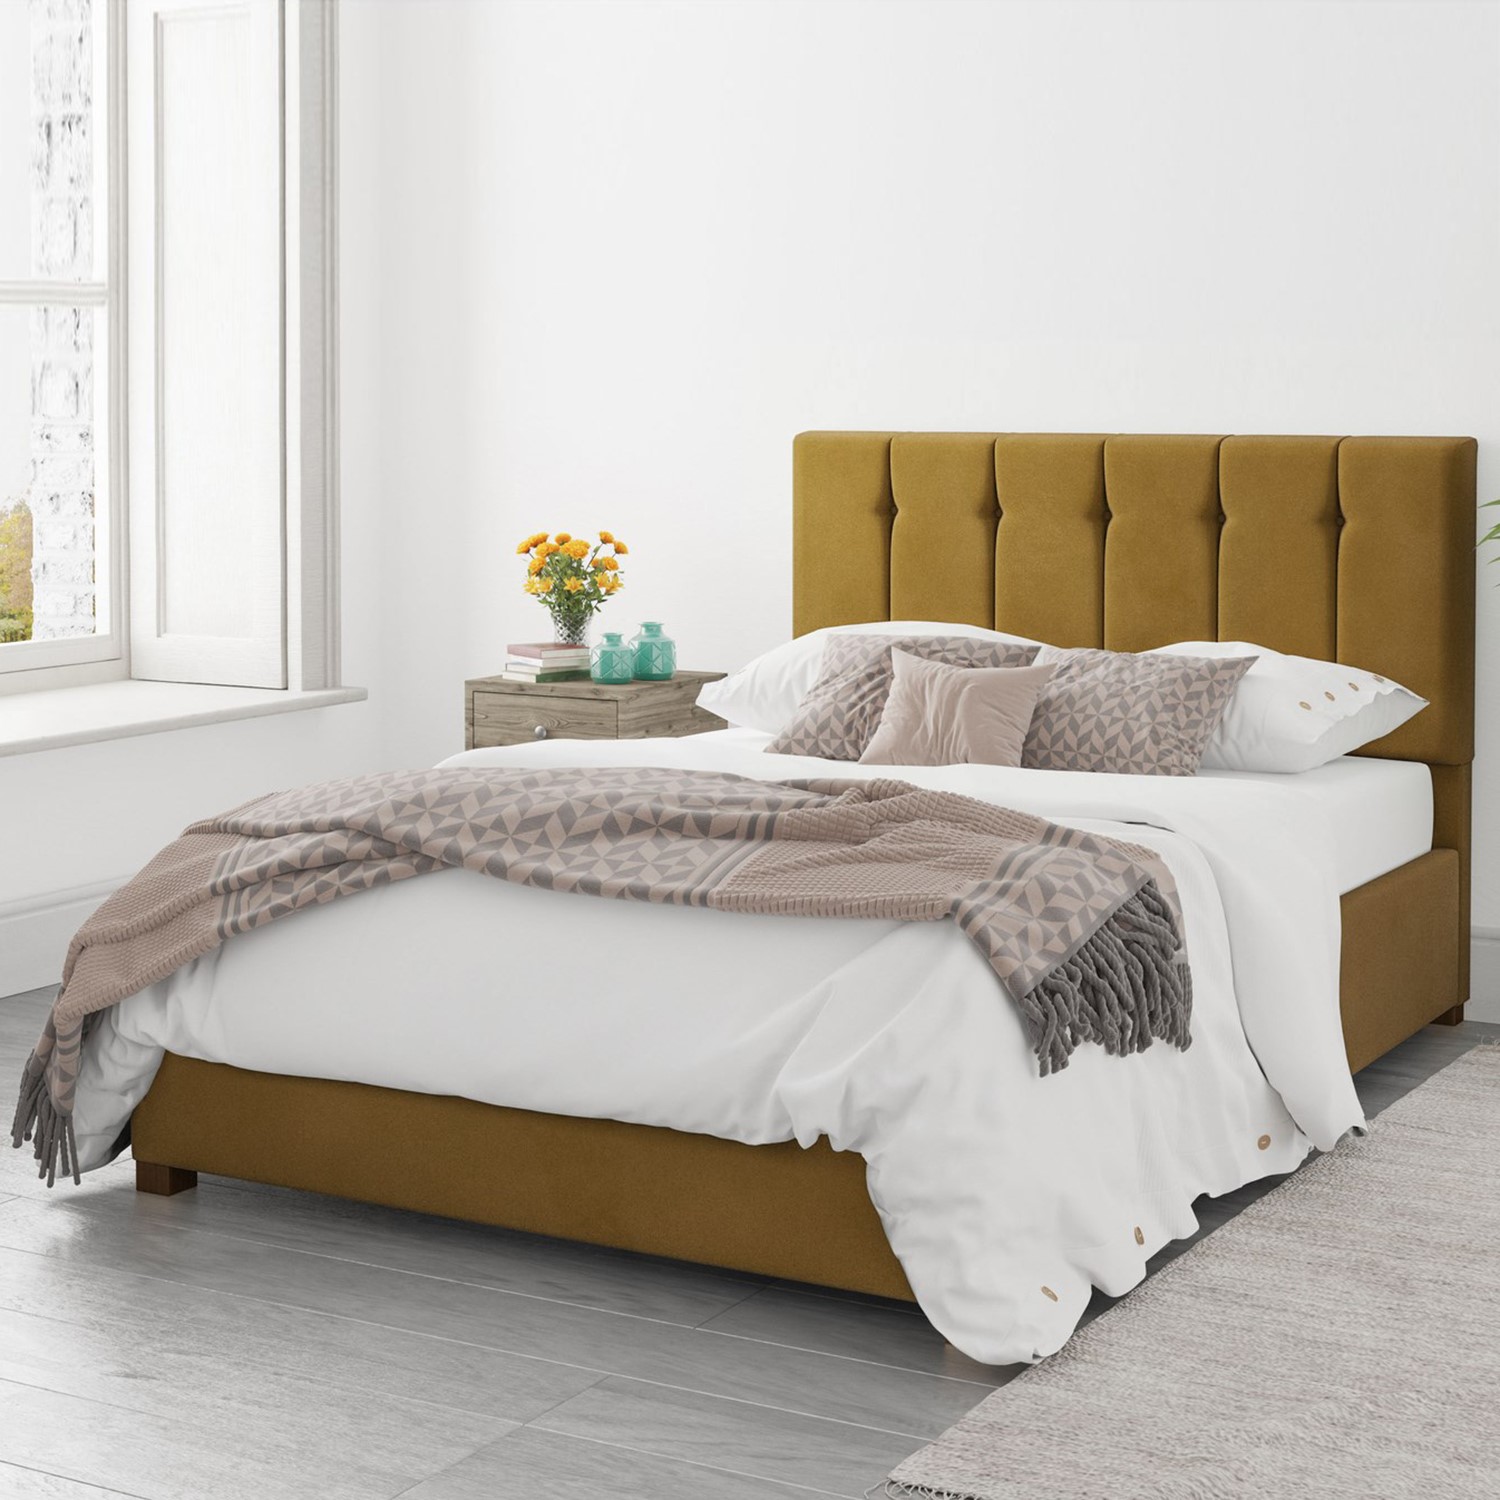 Read more about Mustard velvet double ottoman bed pimilico aspire